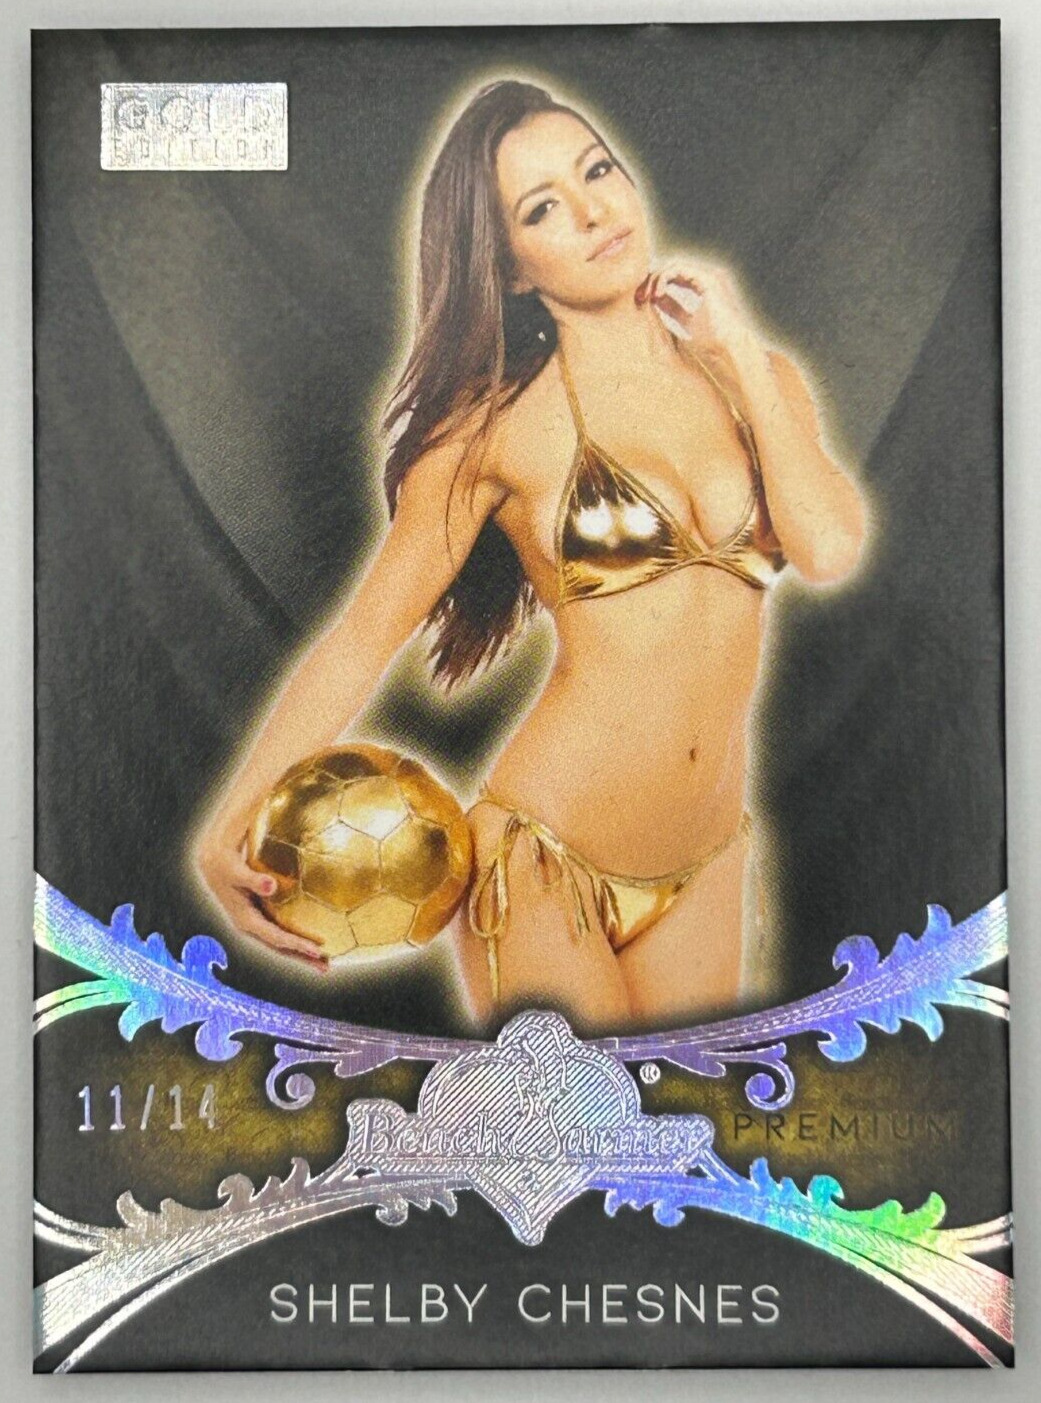 SHELBY CHESNES 2021 Benchwarmer Gold Edition PREMIUM BASE Silver Foil 11/14